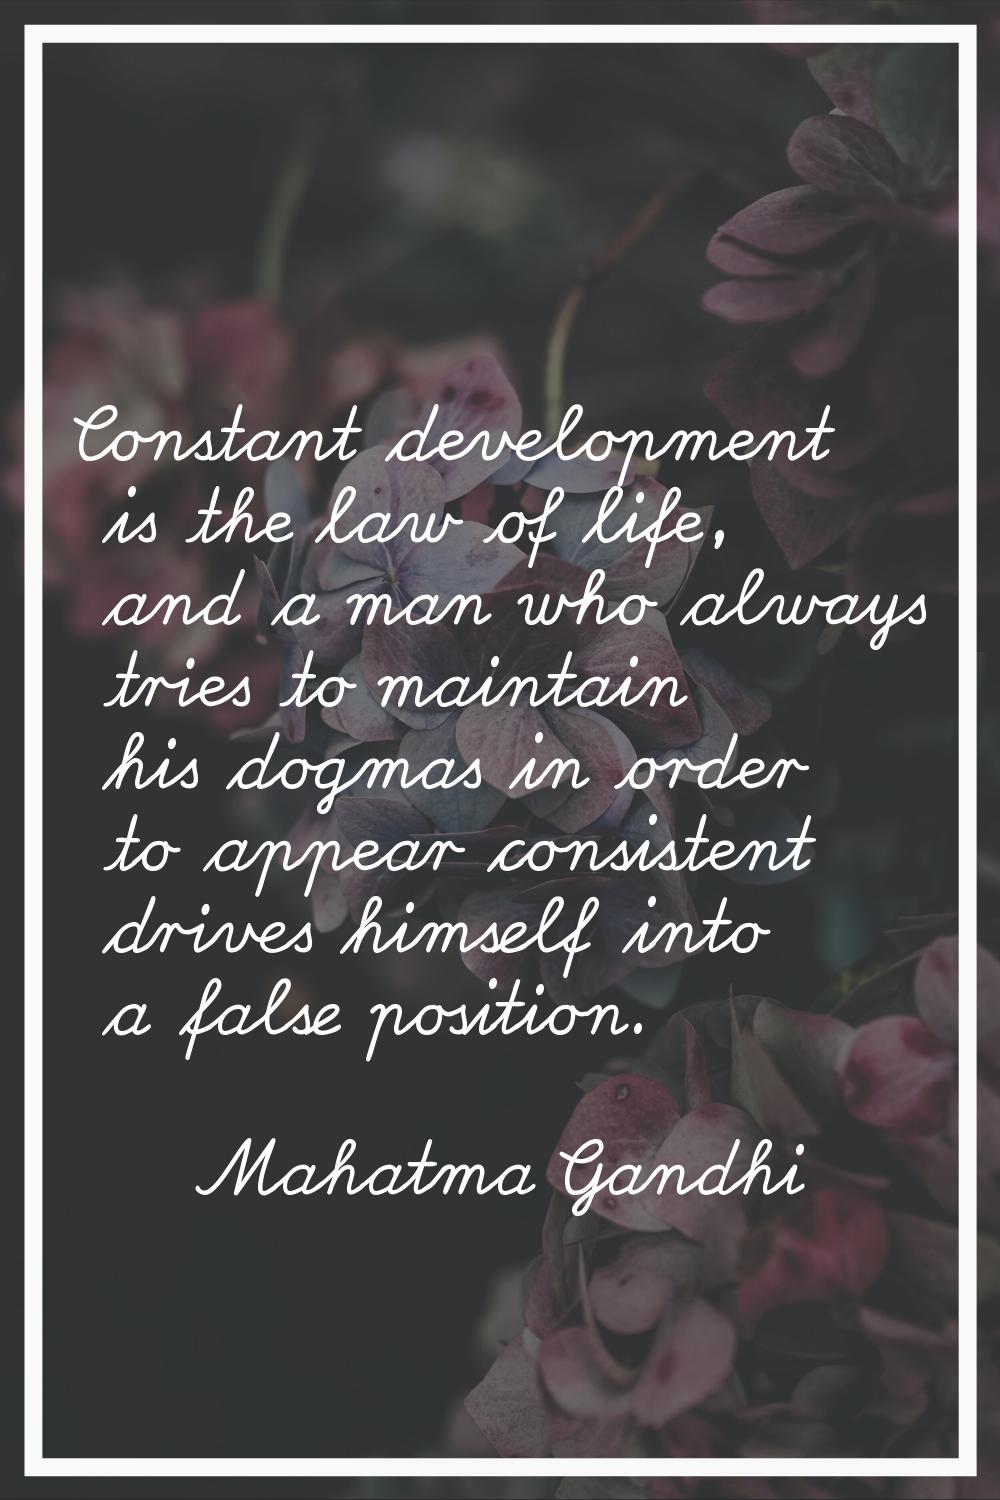 Constant development is the law of life, and a man who always tries to maintain his dogmas in order